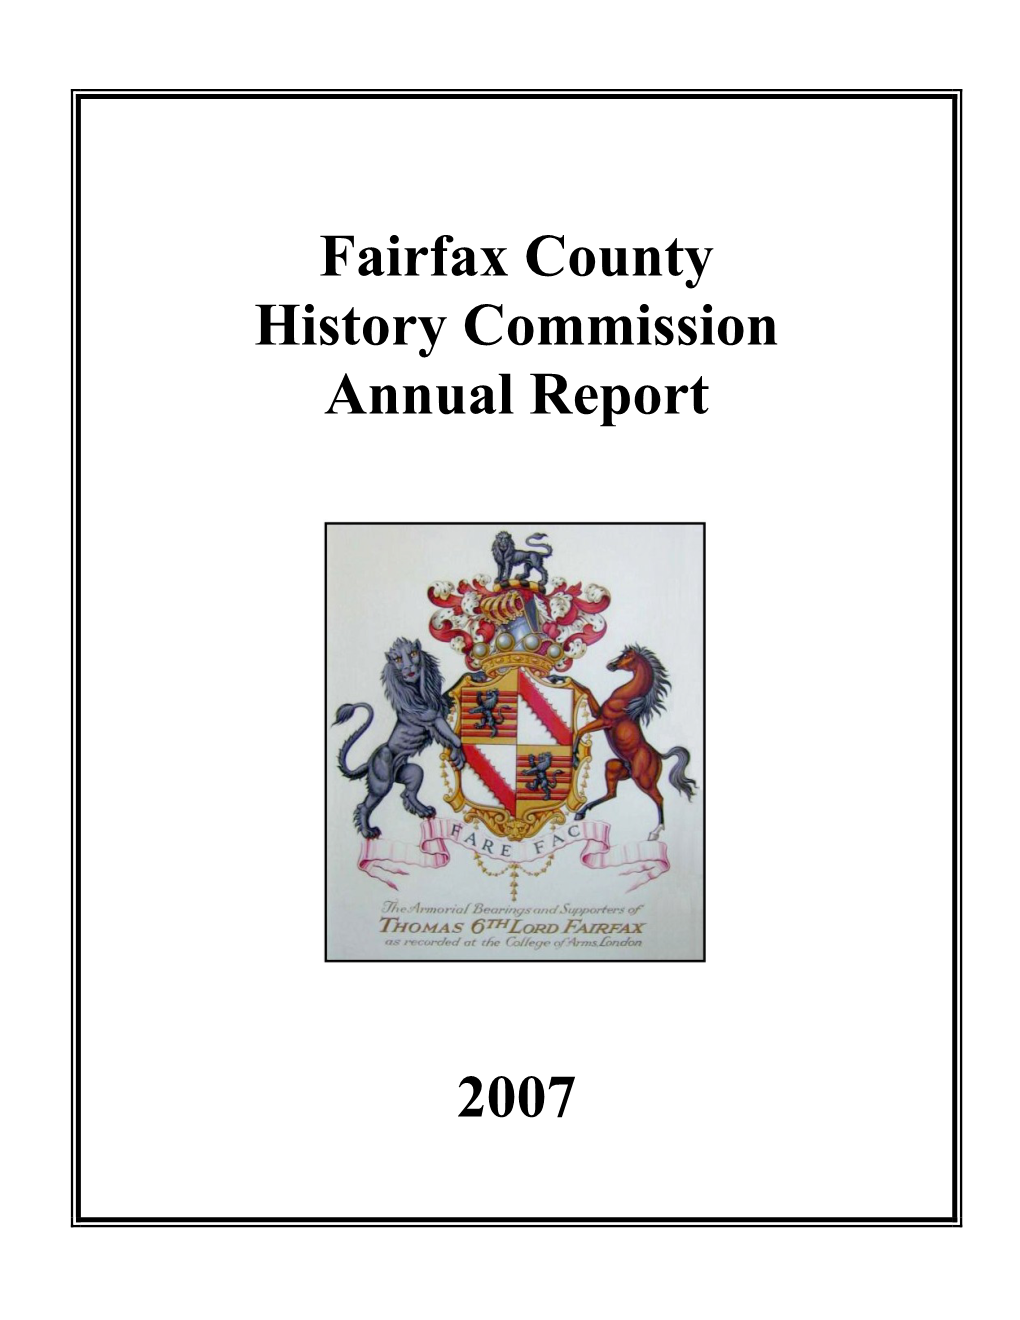 Fairfax County History Commission Annual Report 2007